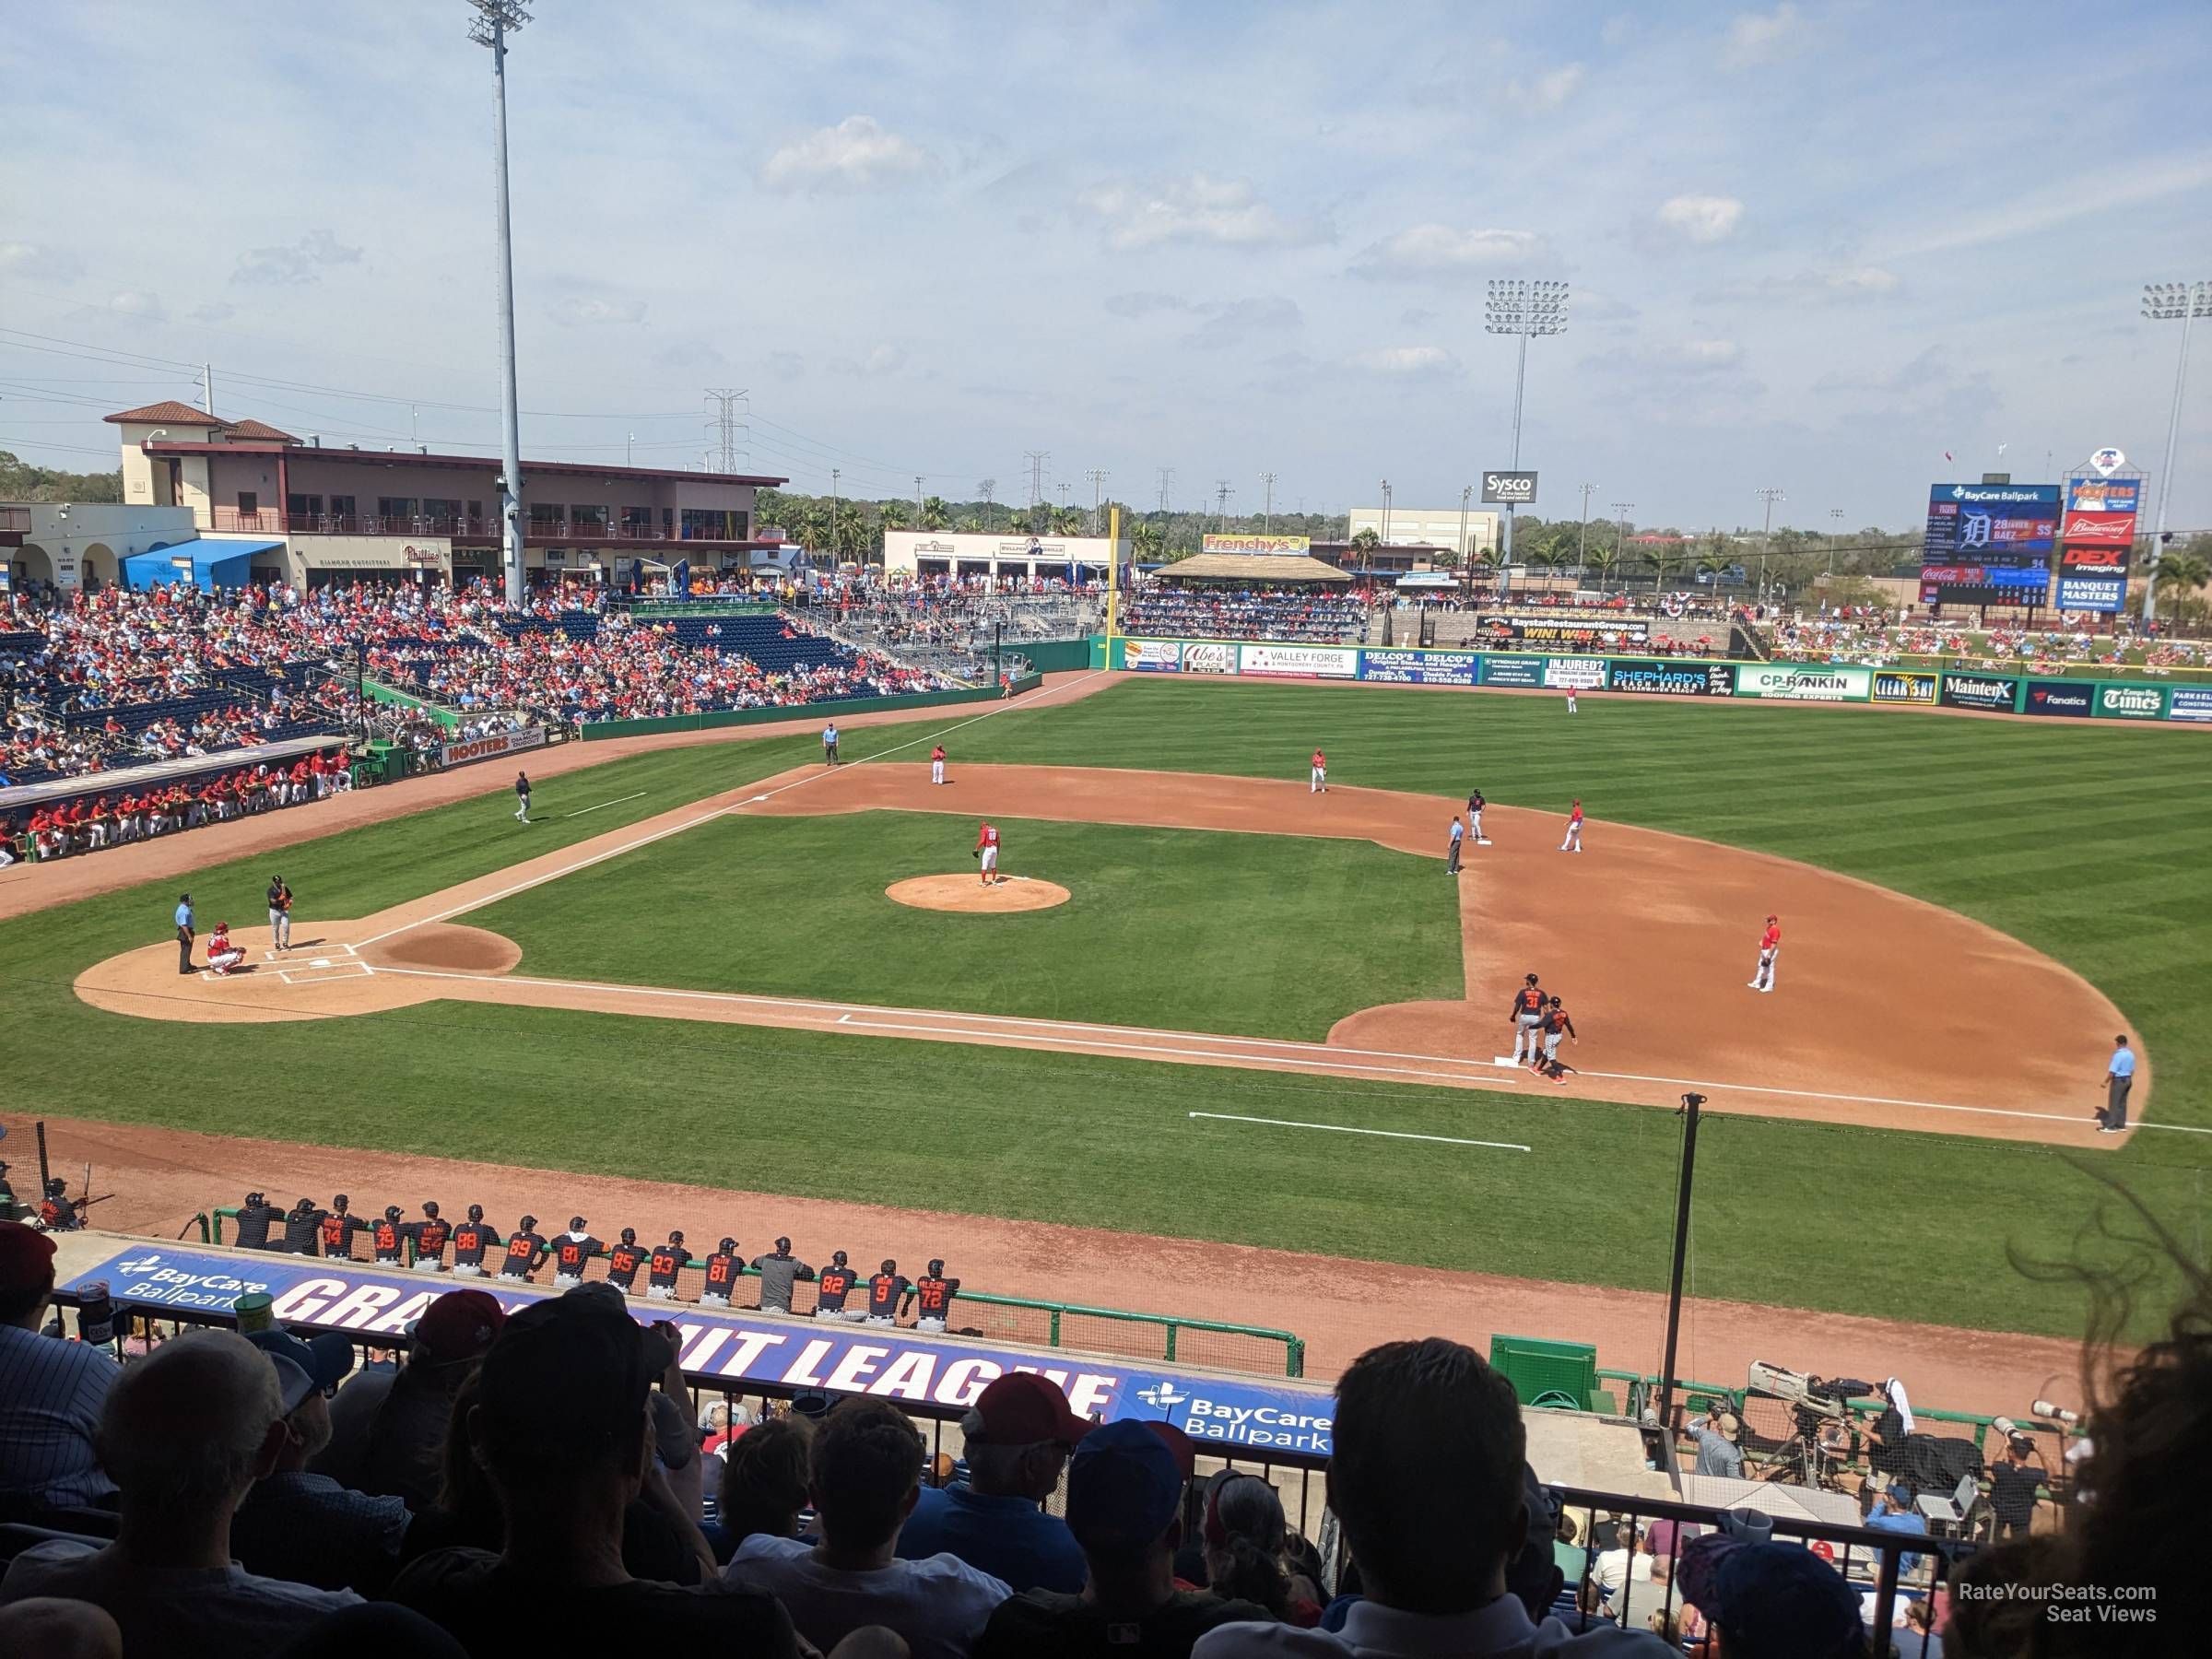 section 203, row 4 seat view  - baycare ballpark